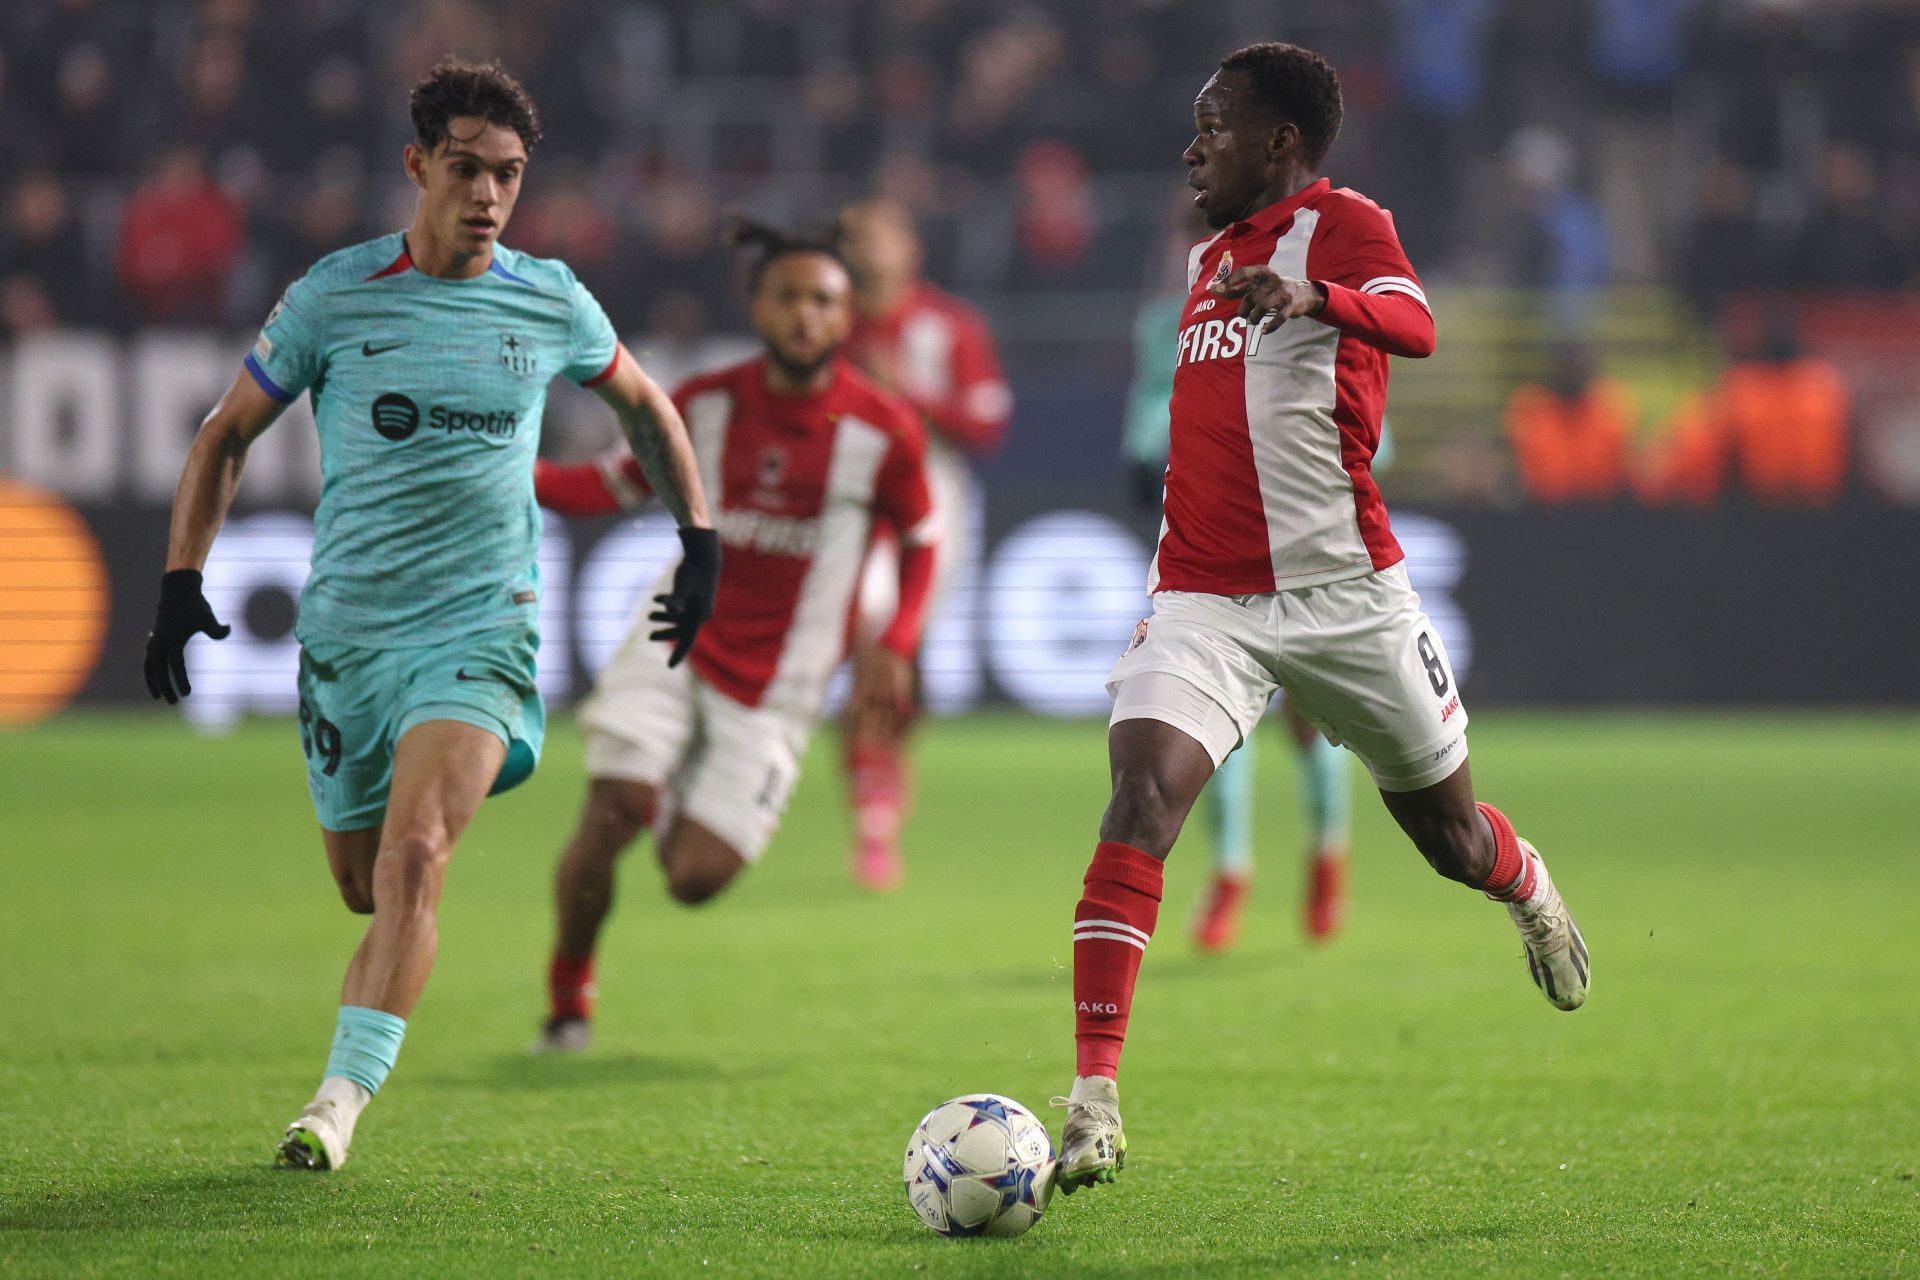 Royal Antwerp FC v FCB: Group H - UEFA Champions League 2023/24 (Photo by Dean Mouhtaropoulos/Getty Images)